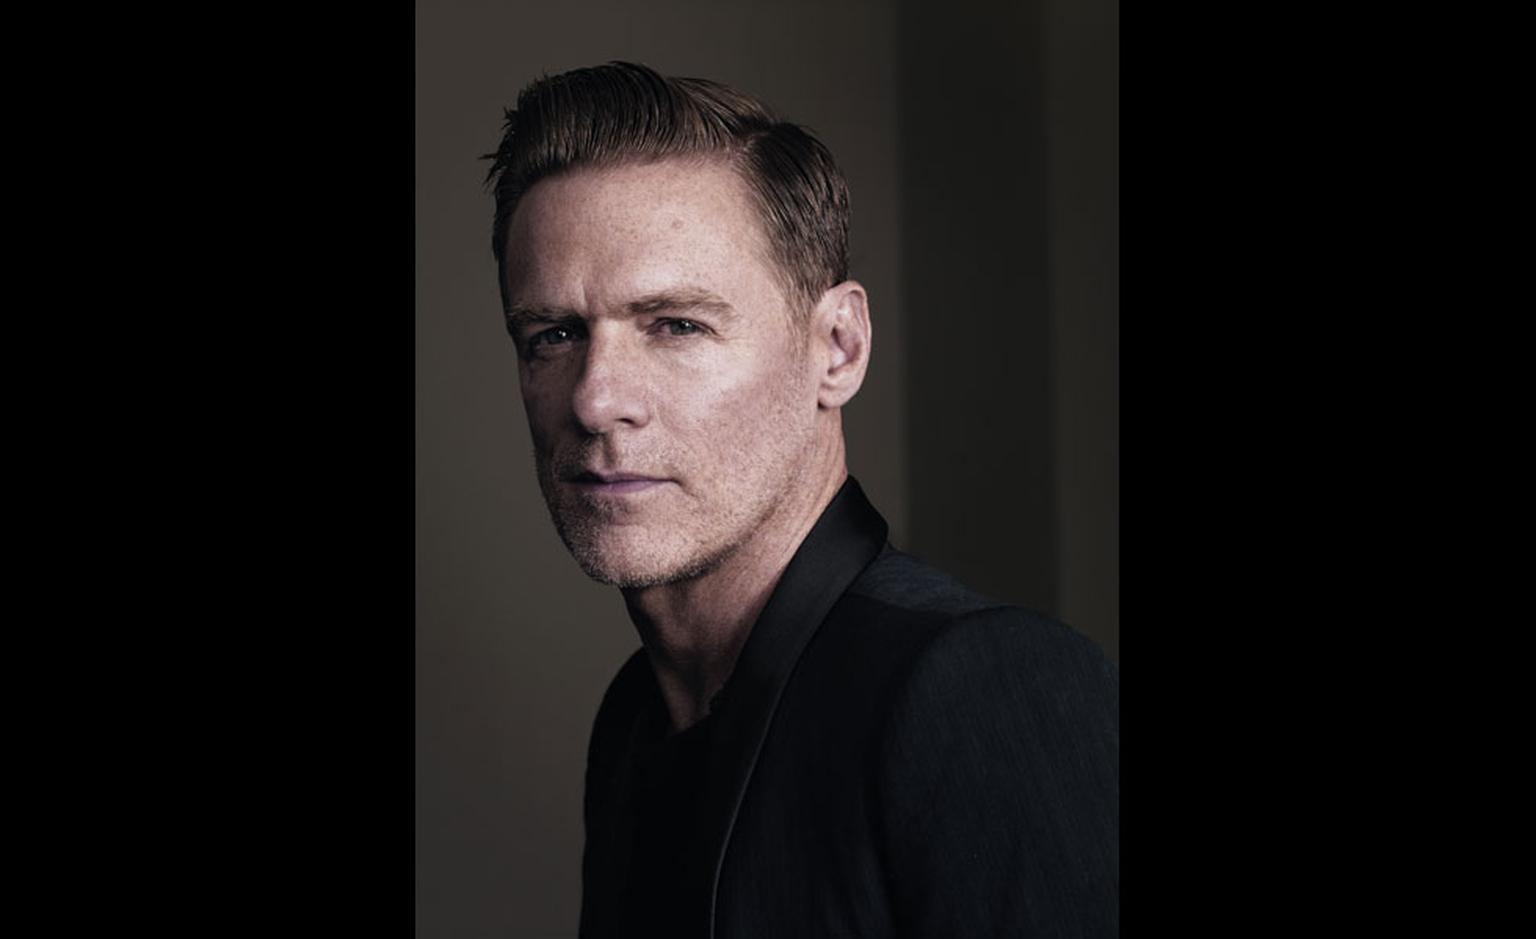 Bryan Adams will  play at the City of London's first rock concert, City Rocks on 22 February 2011 where Angelina Jolie's black spinel necklace will be auctioned for charity.